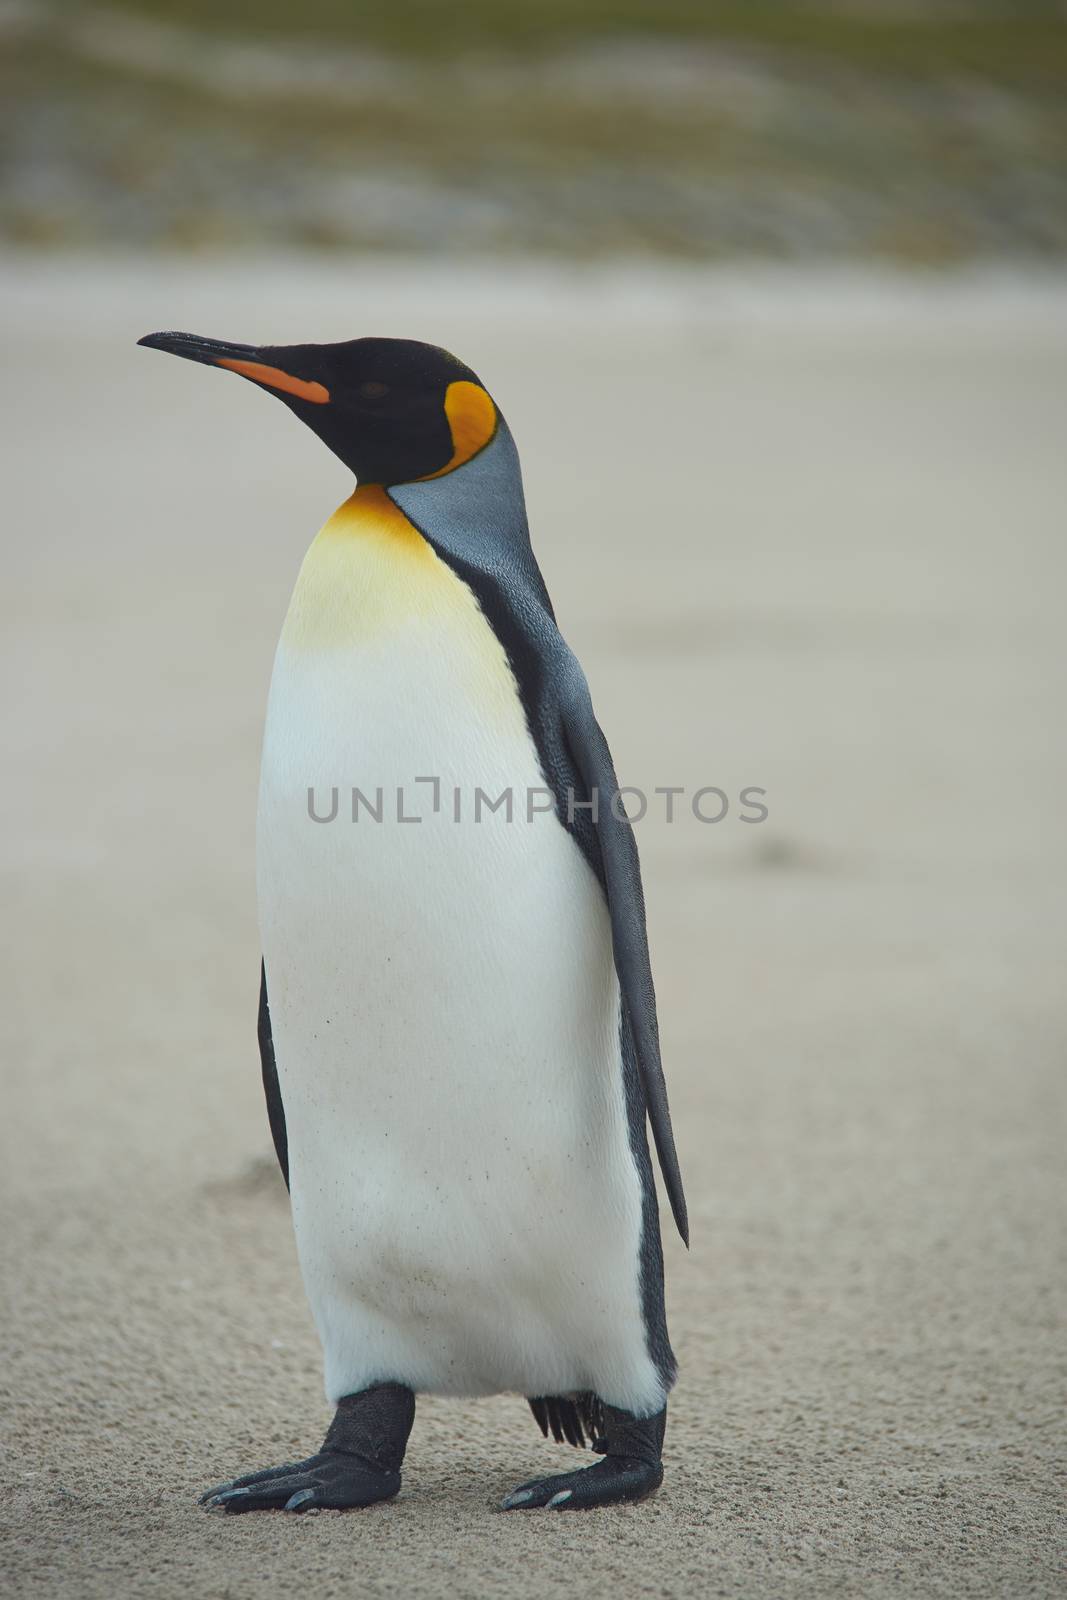 King Penguin (Aptenodytes patagonicus) on the beach of Sandy Bay on Bleaker Island in the Falkland Islands.